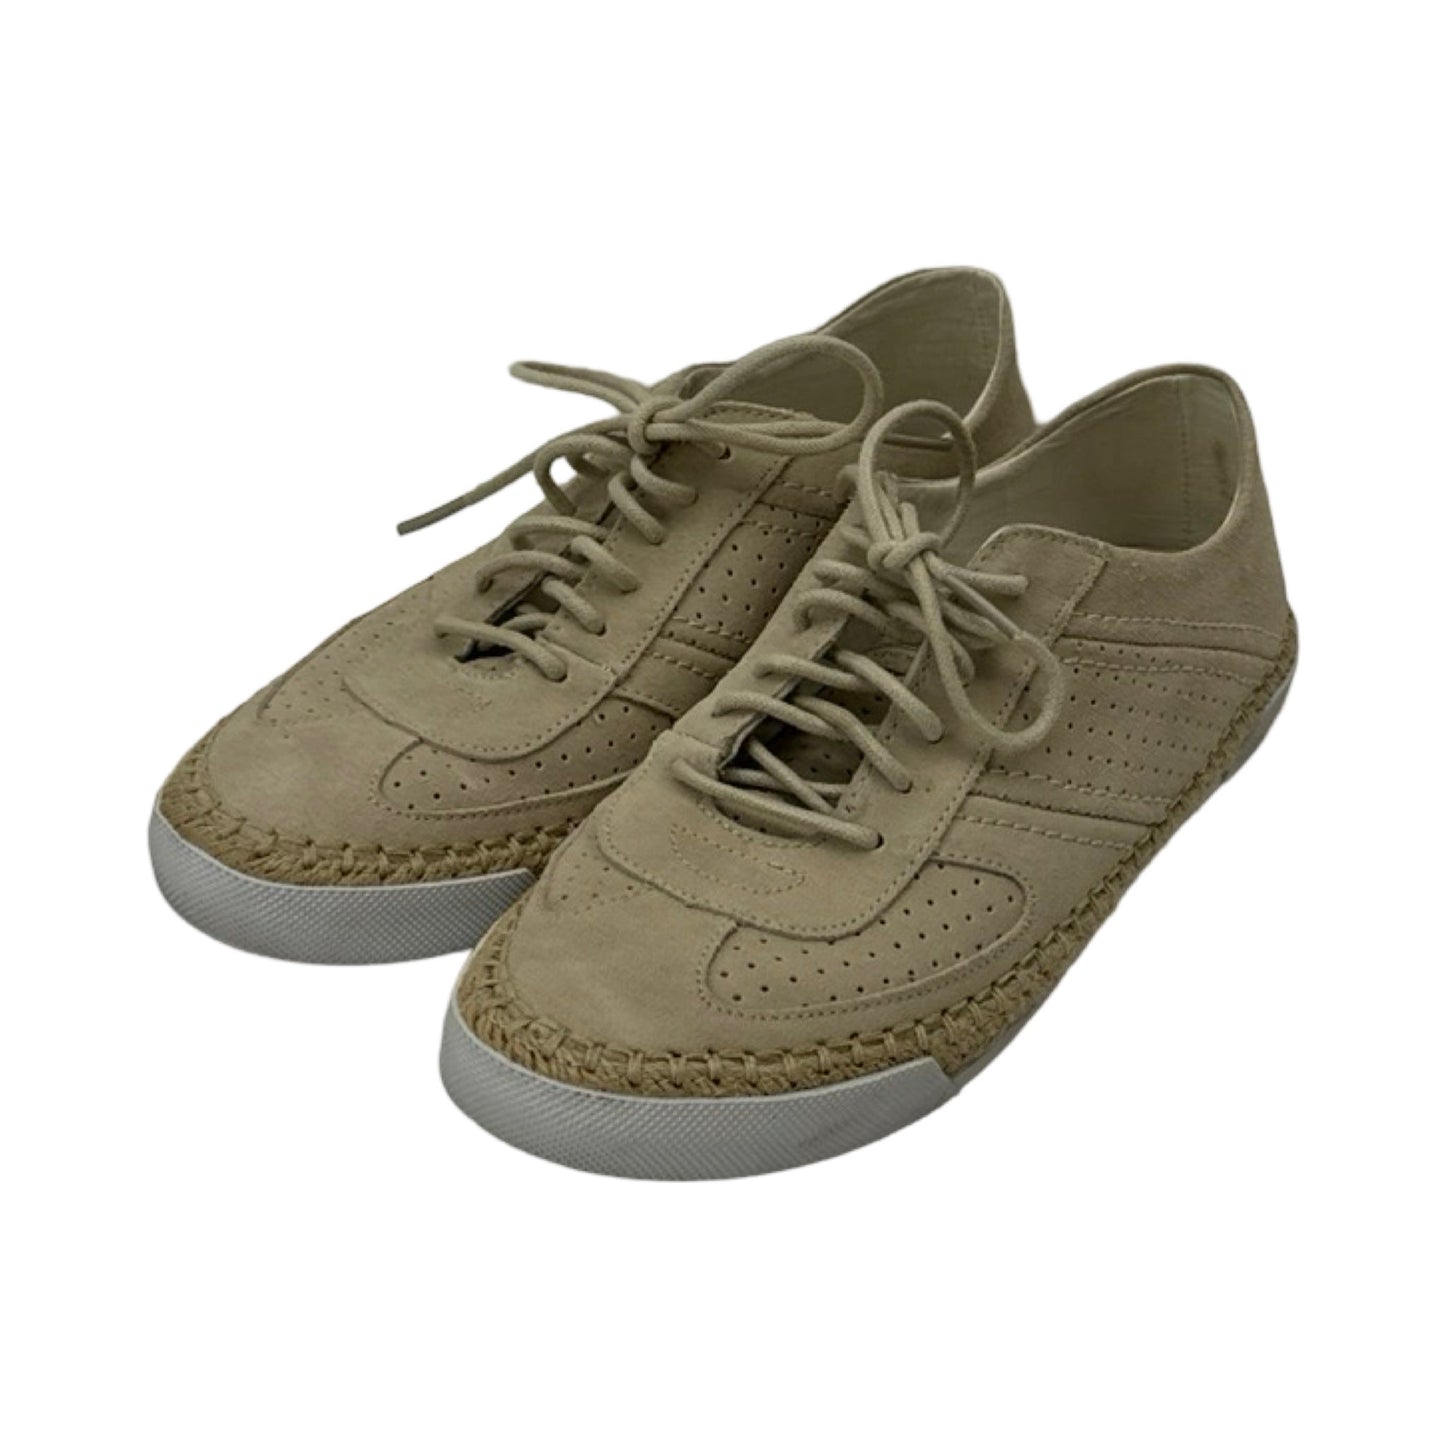 Beige Shoes Sneakers Coach, Size 8